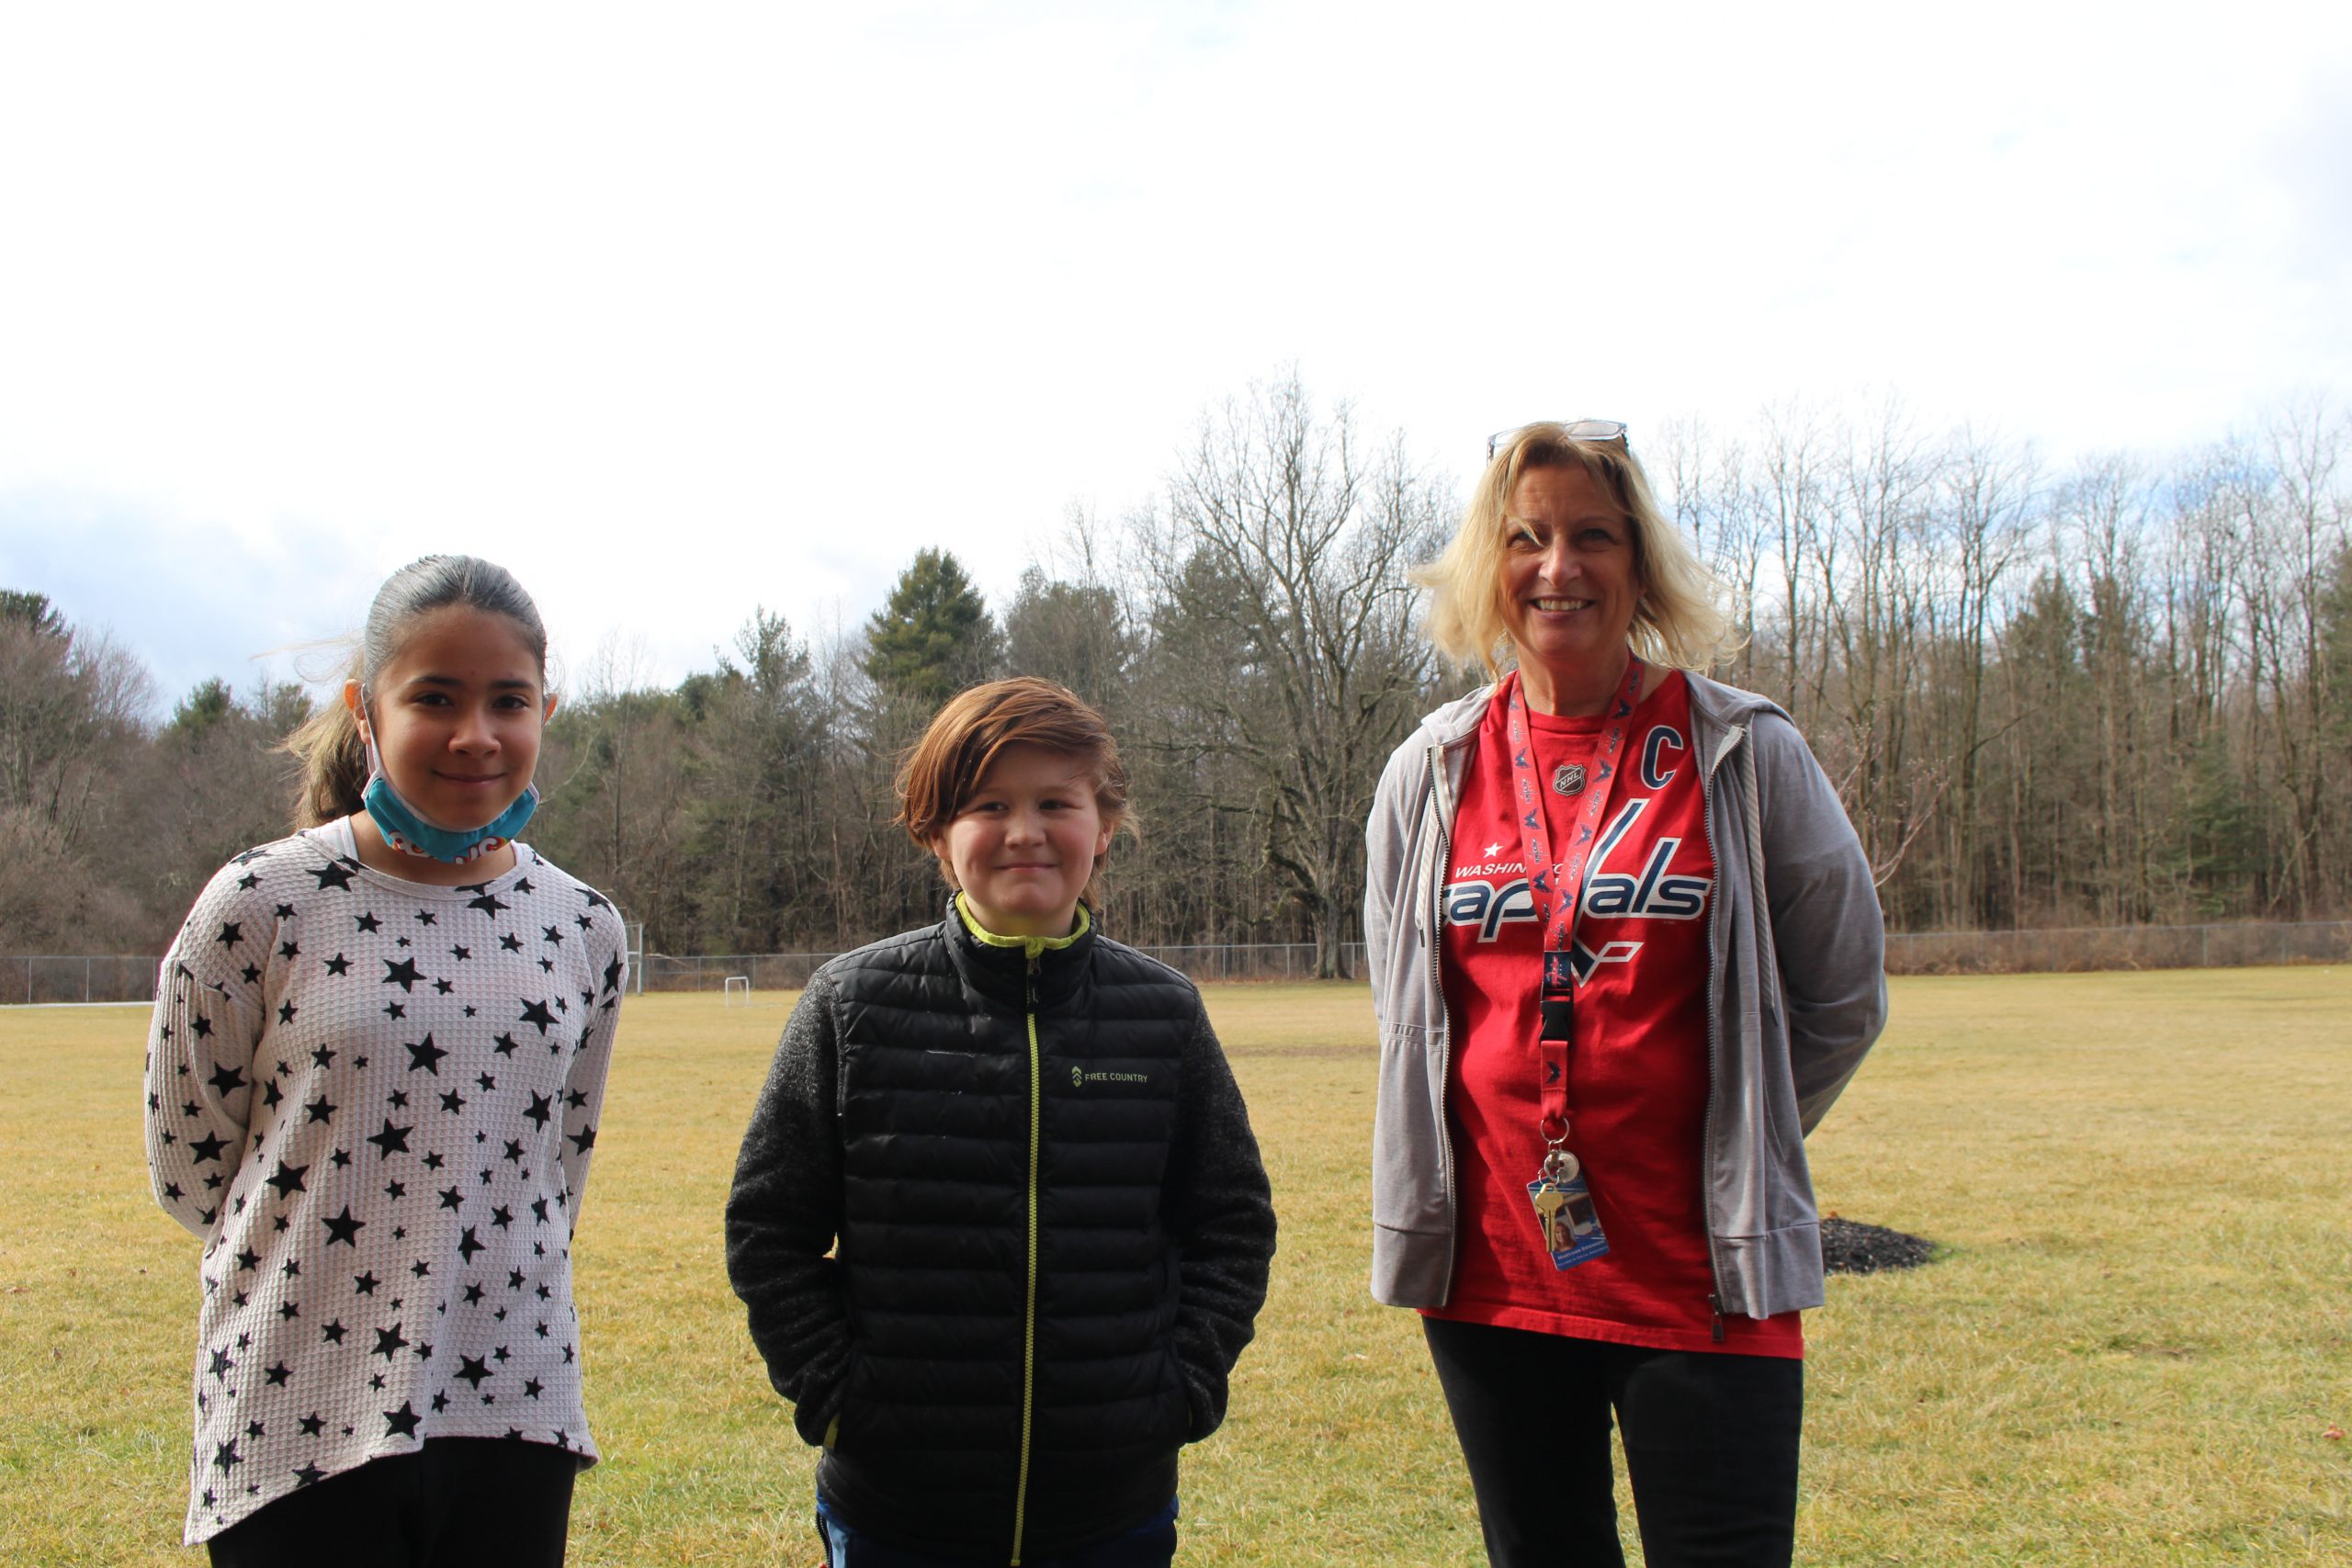 Maryann Swensen is standing with two of her elementary students outside. The field can be seen in the background.